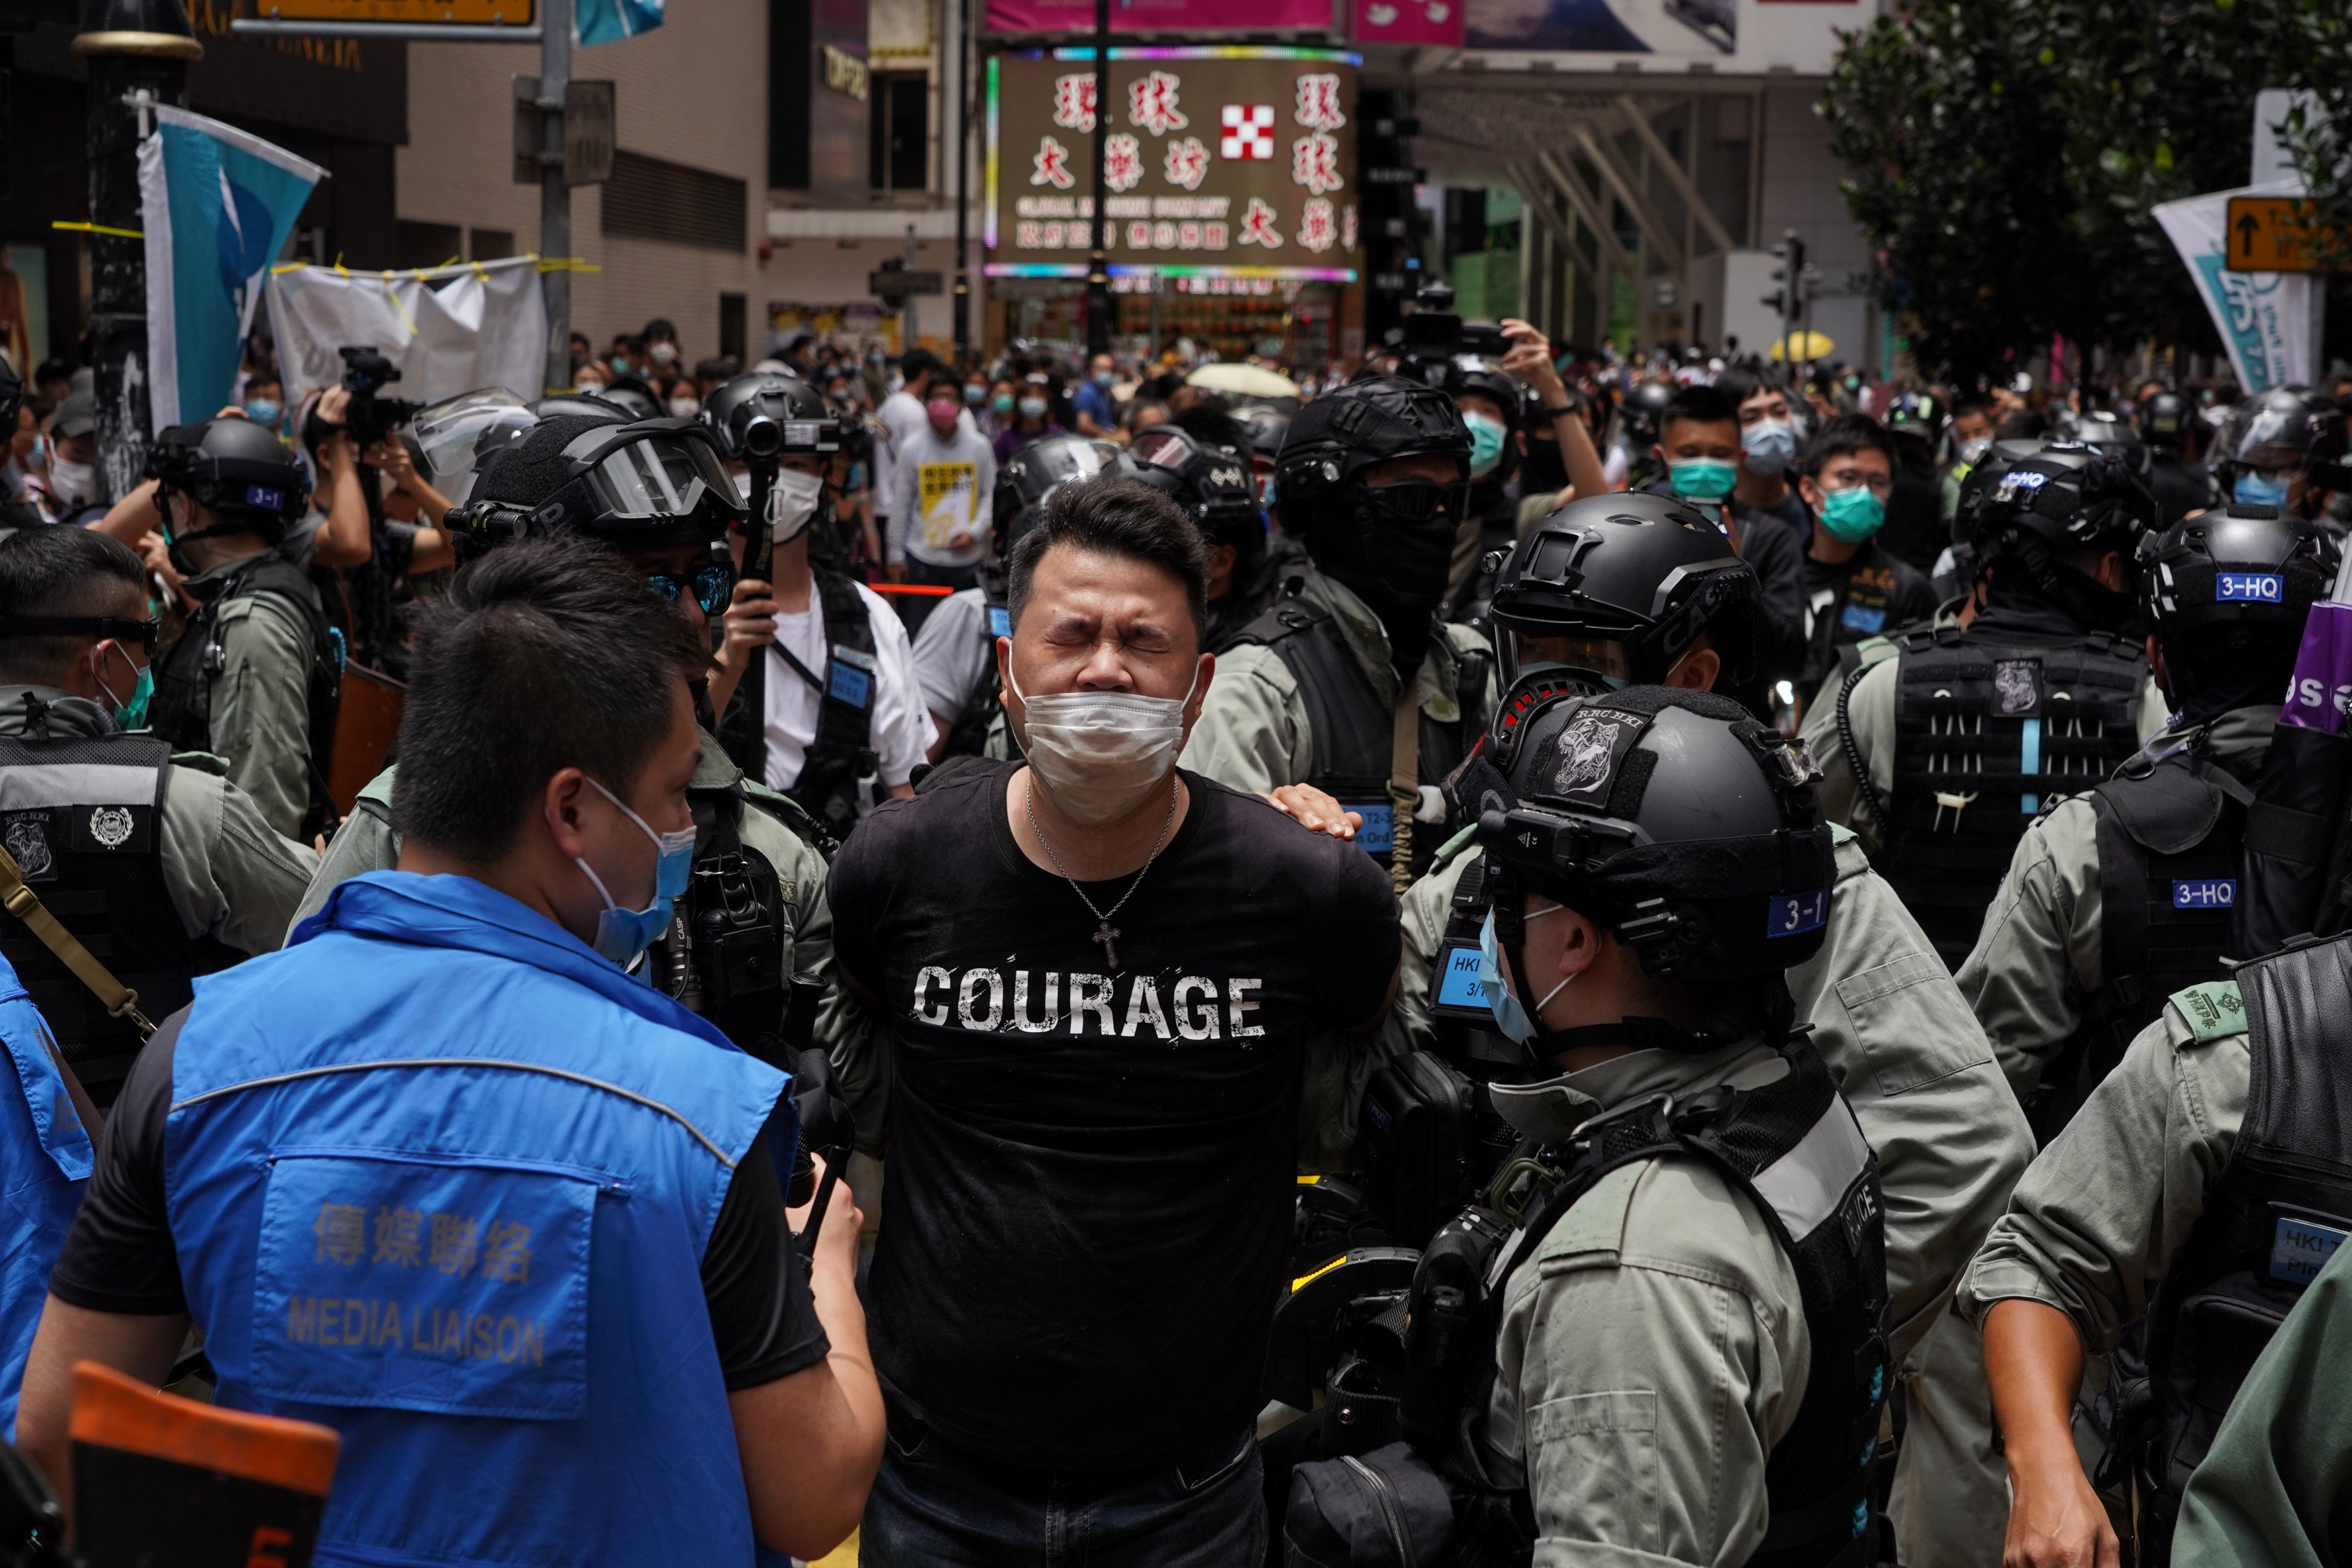 Andrew Wan, a pro-democracy lawmaker, is arrested by riot police during a protest in Hong Kong on July 1, 2020. (Yat Kai Yeung—NurPhoto/Getty Images)